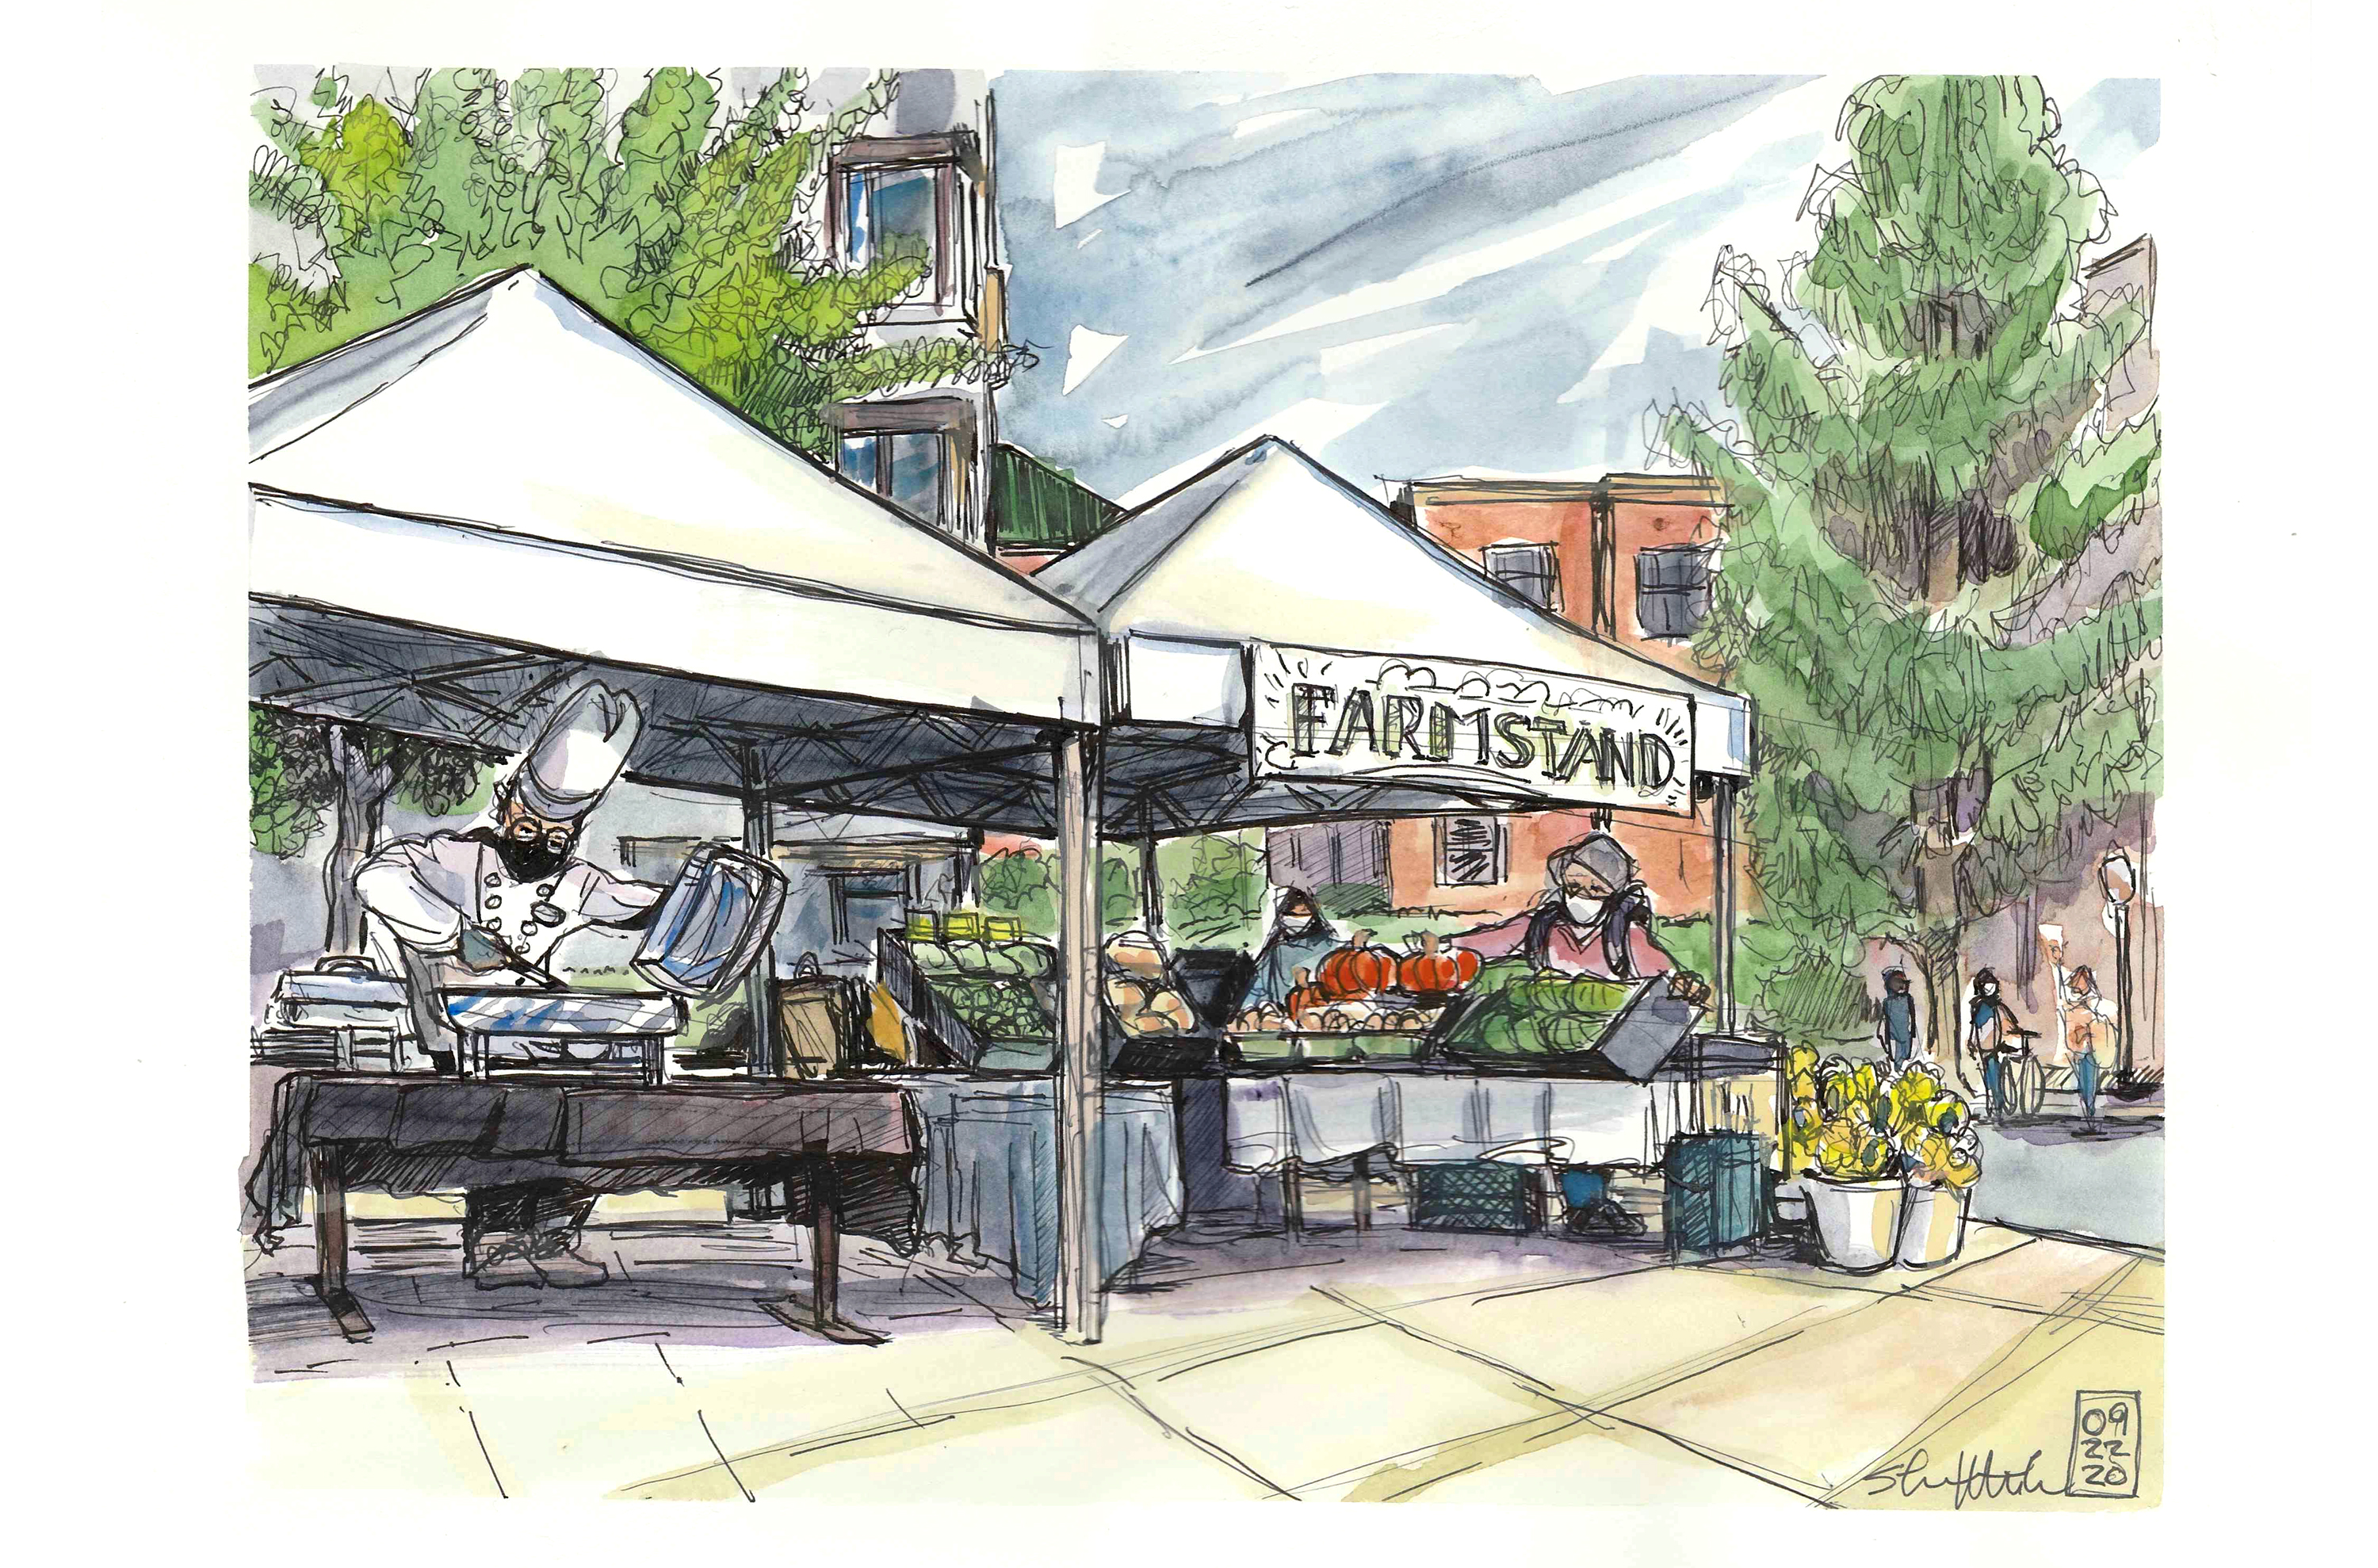 Homefield Farm Stand at Lavery Hall - Appeared on Sept. 28, 2020